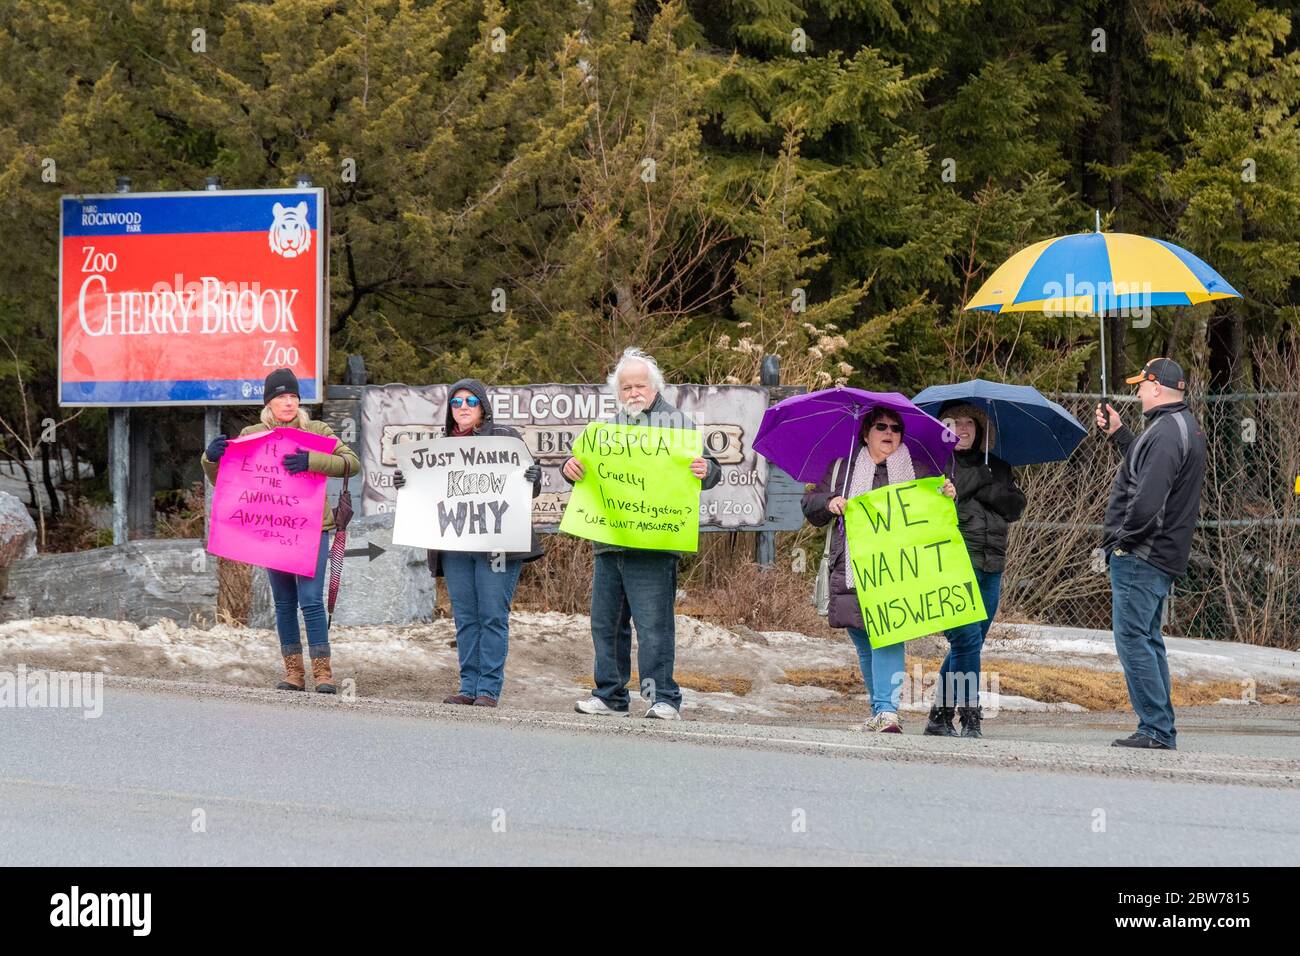 Saint John, NB, Canada - March 23, 2019: Protesters demand answers to reports of alleged animal abuse at the Cherry Brook Zoo. Stock Photo